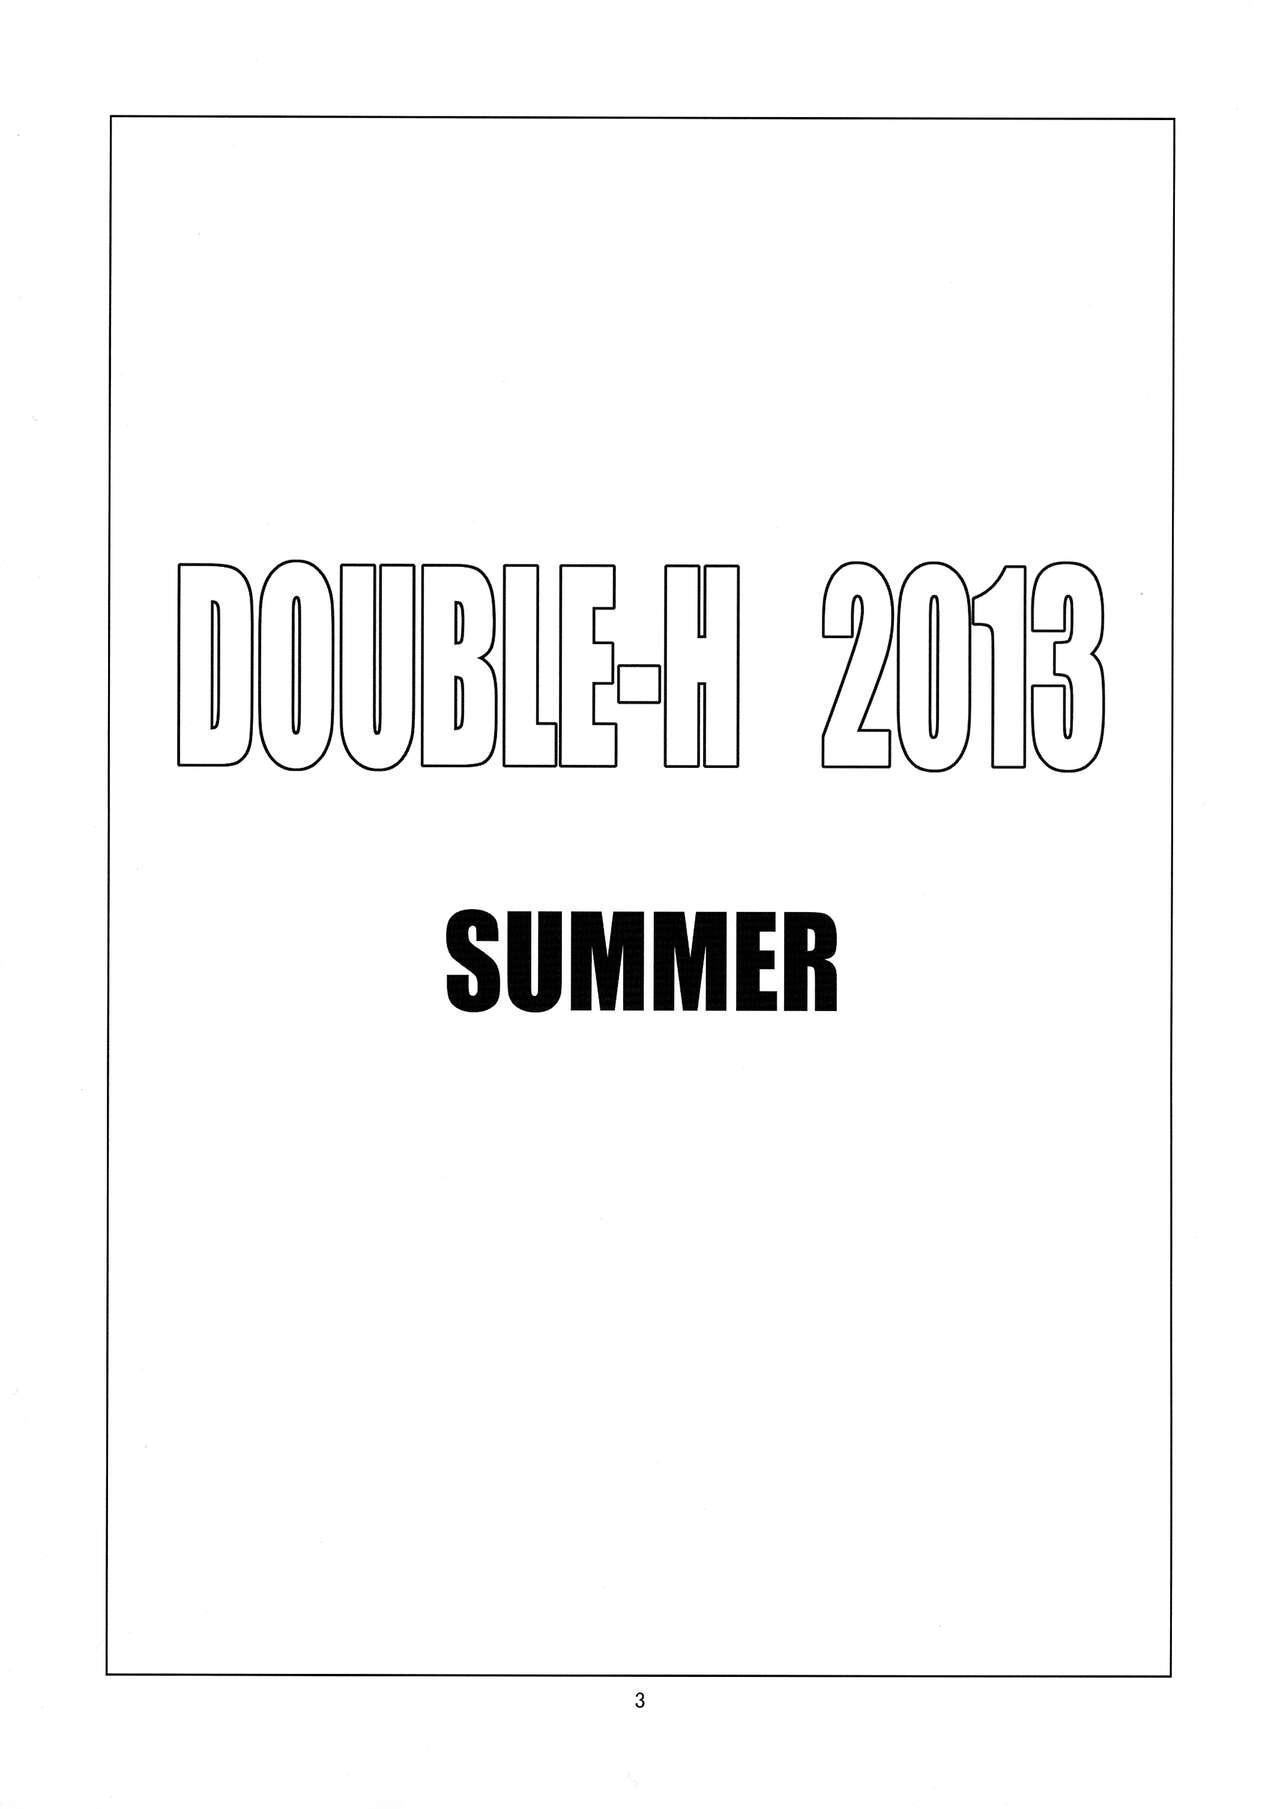 DOUBLE-H 2013 SUMMER 3